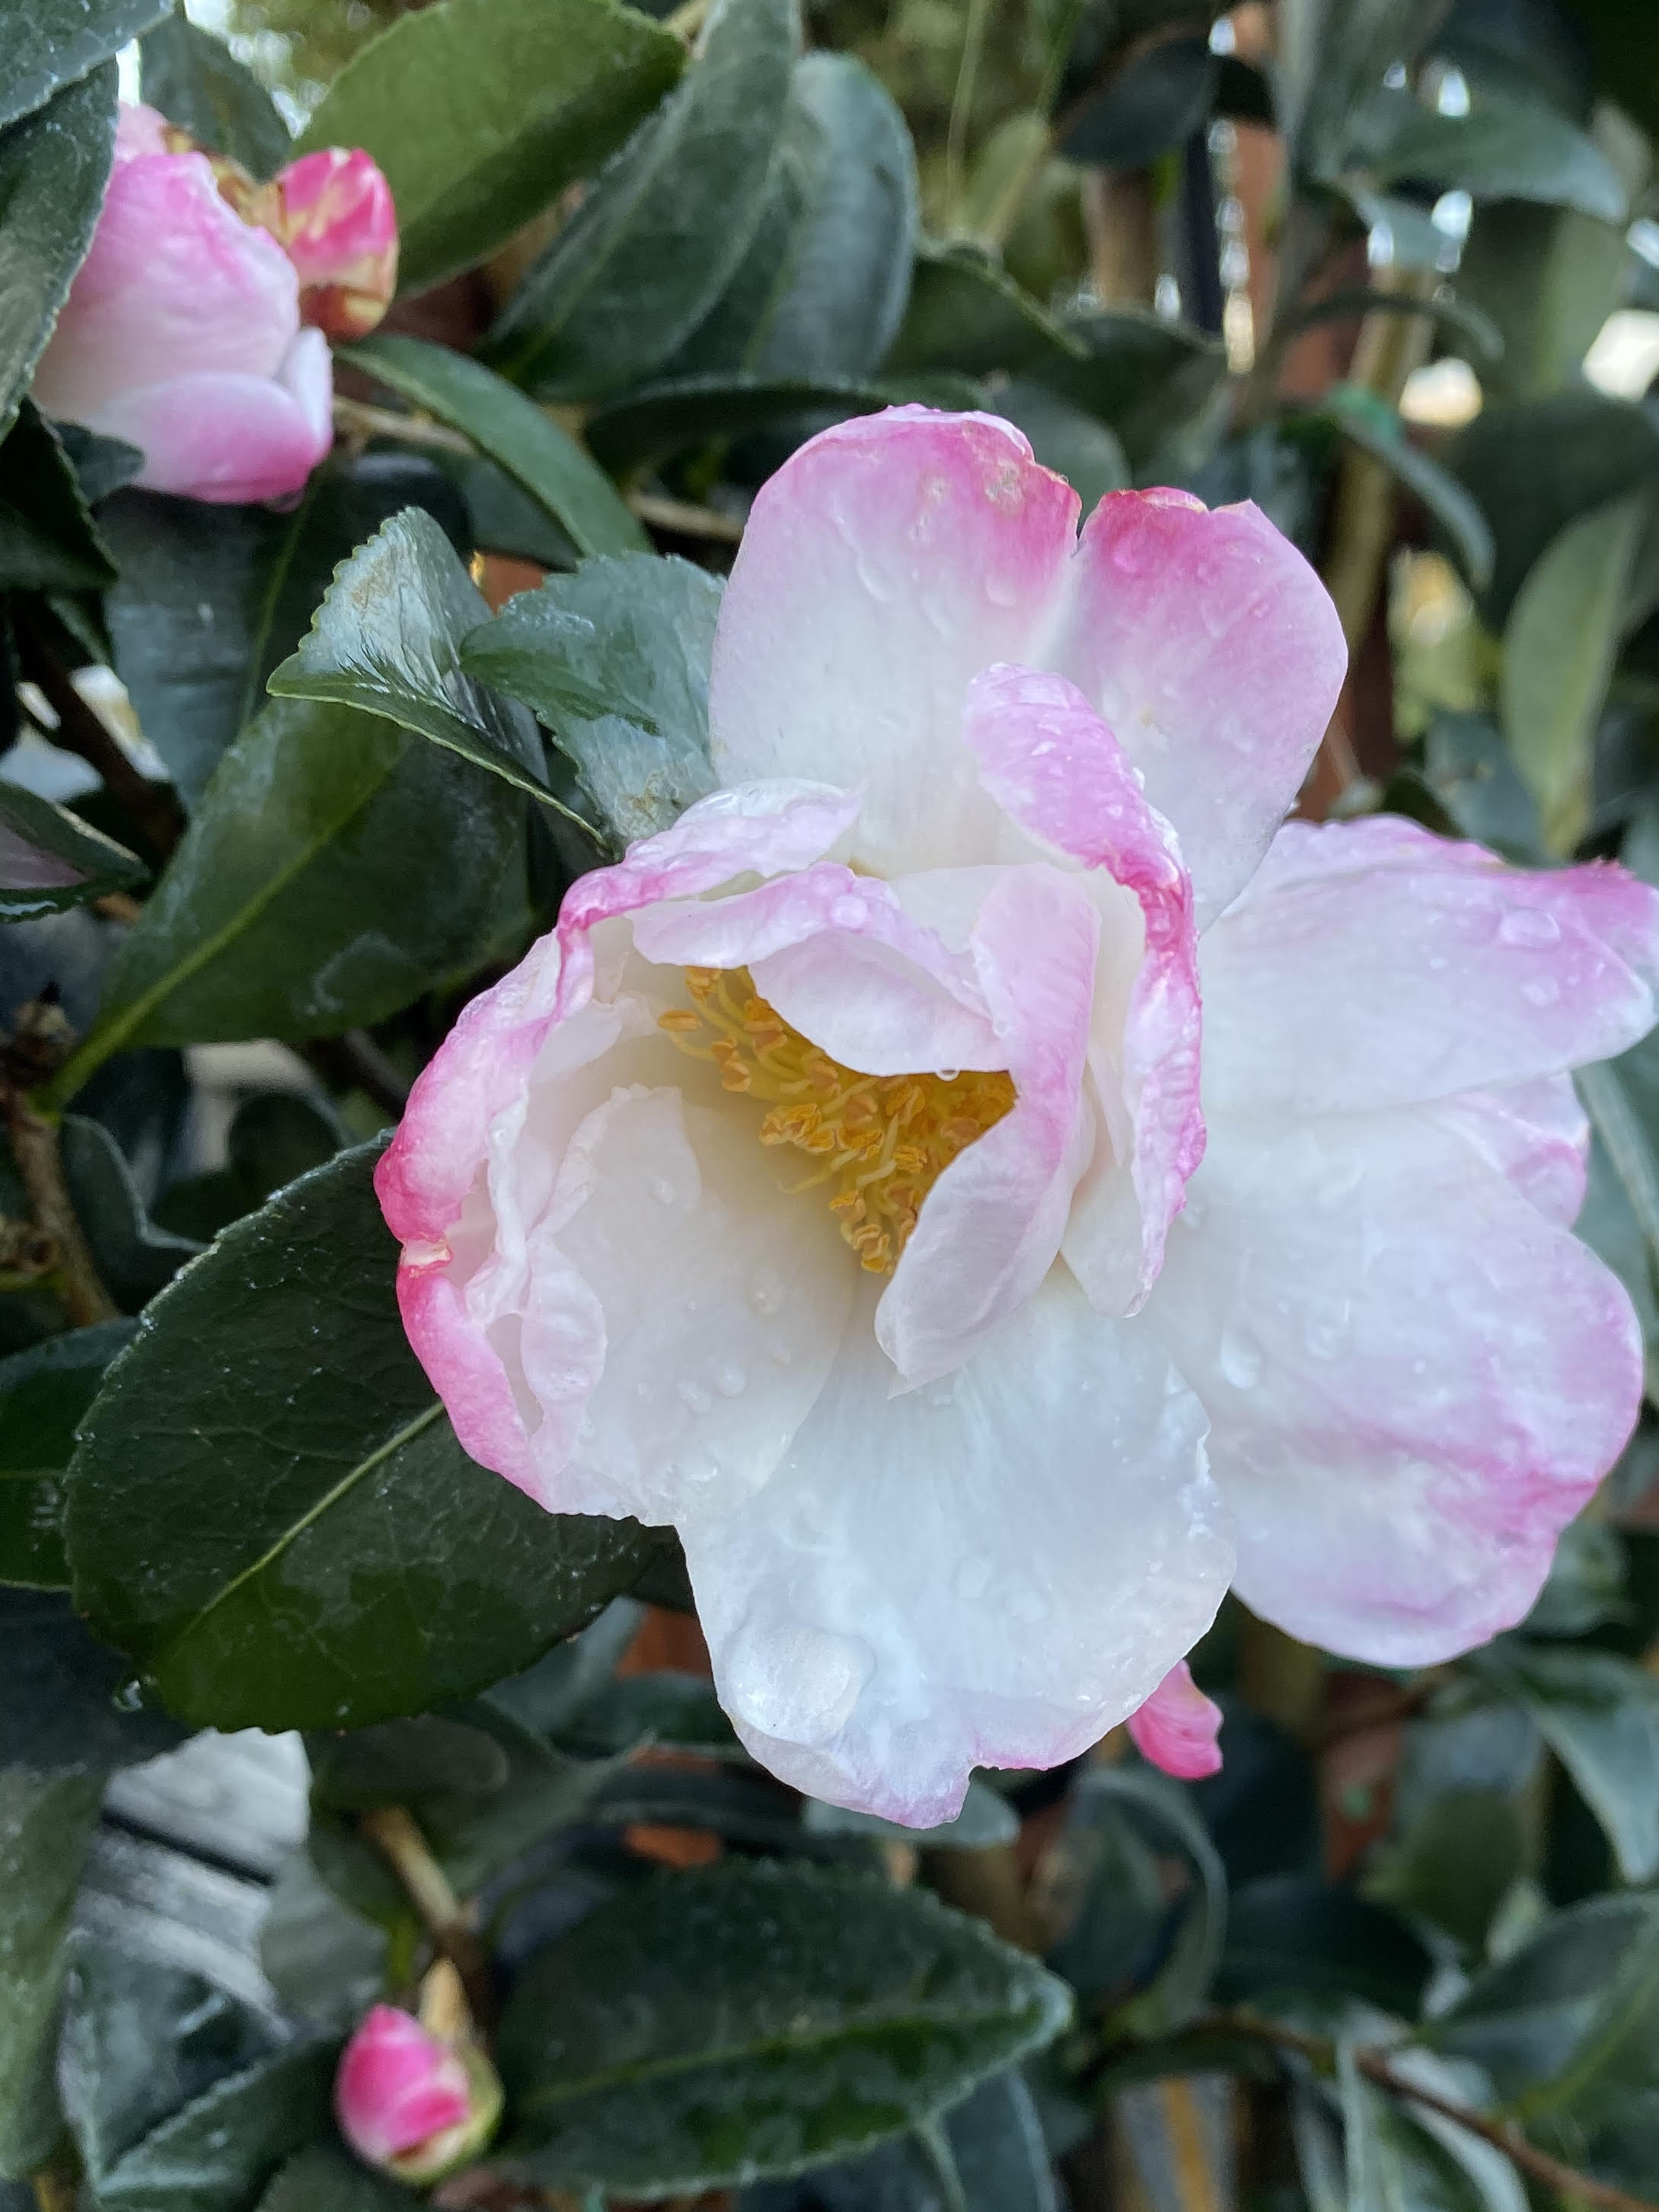 A single layer of white petals with pink edges surround a yellow center.